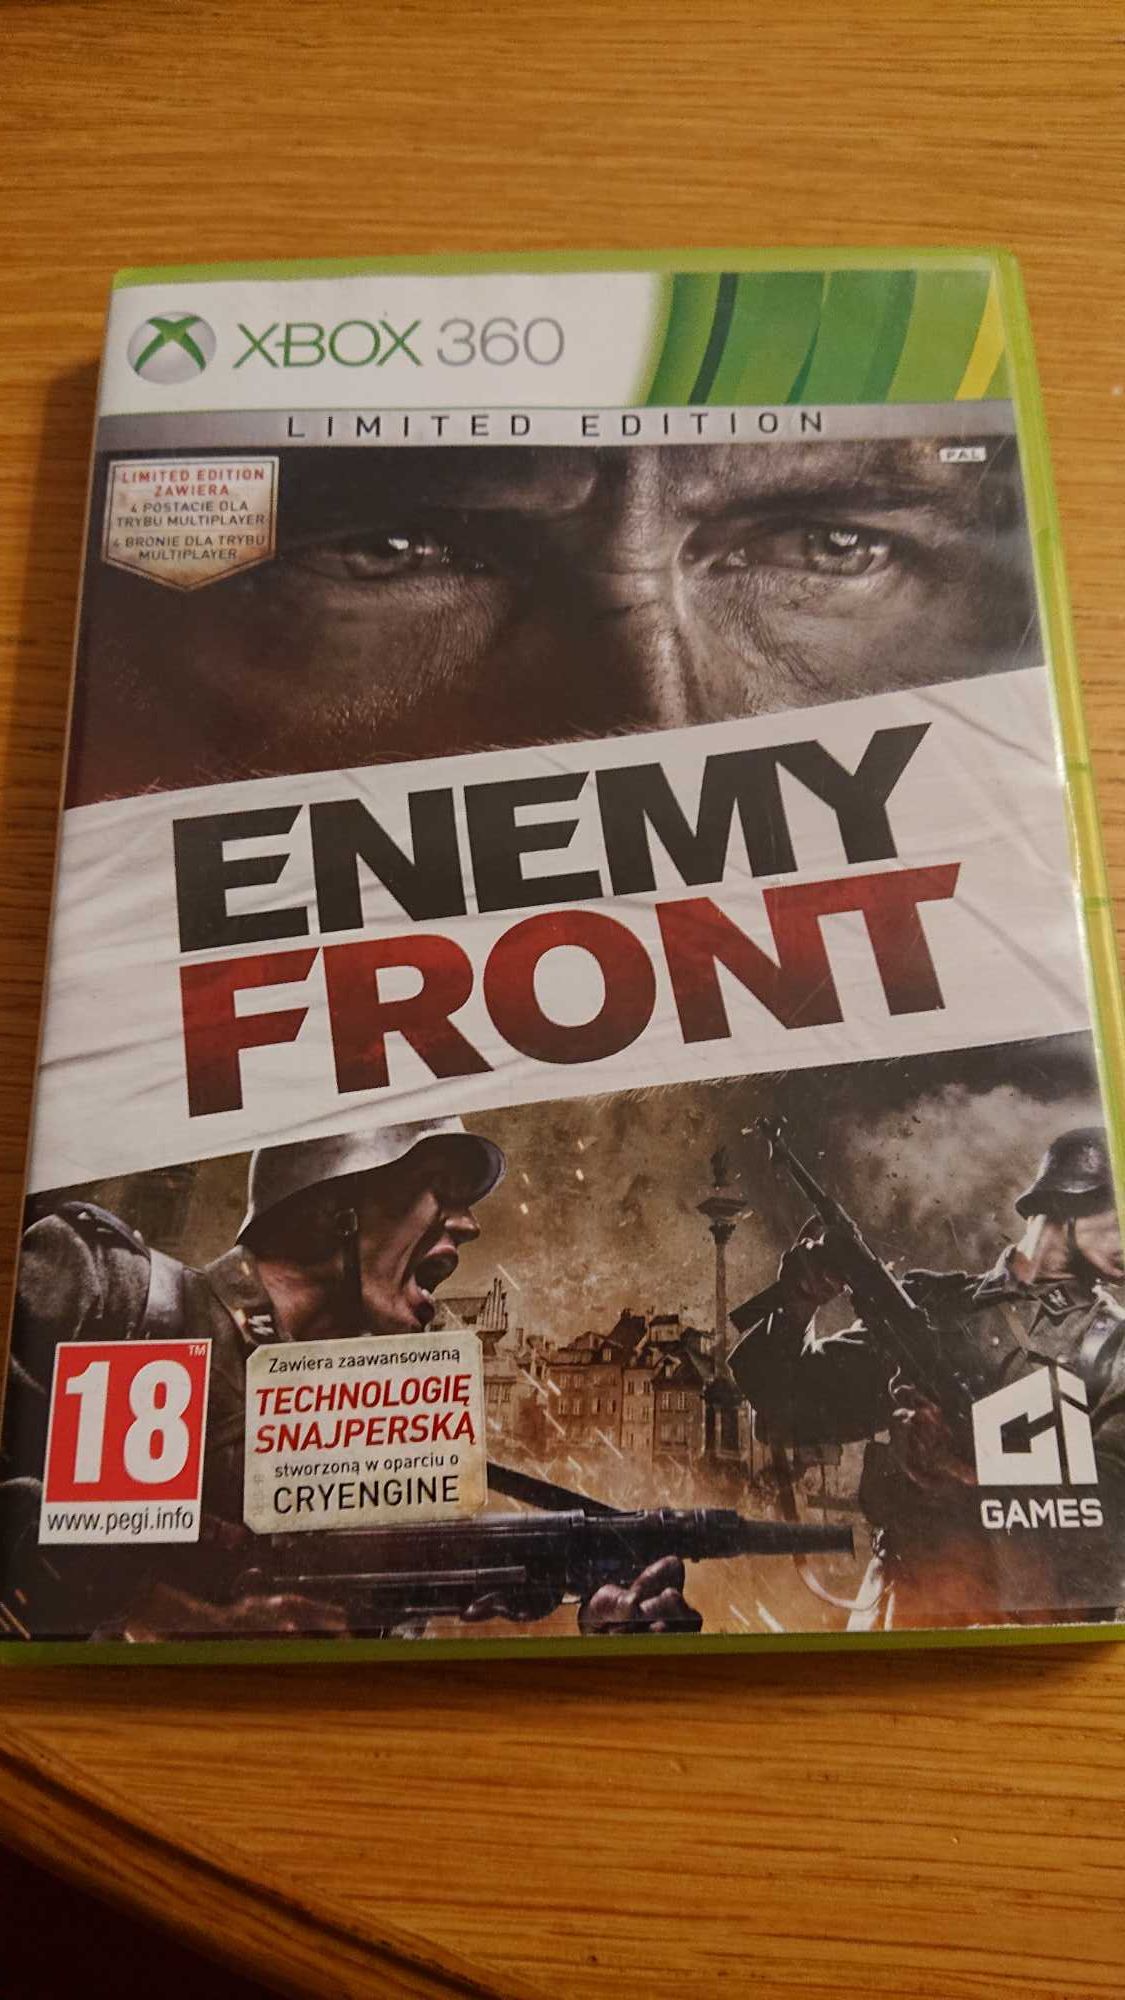 Enemy Front Xbox 360